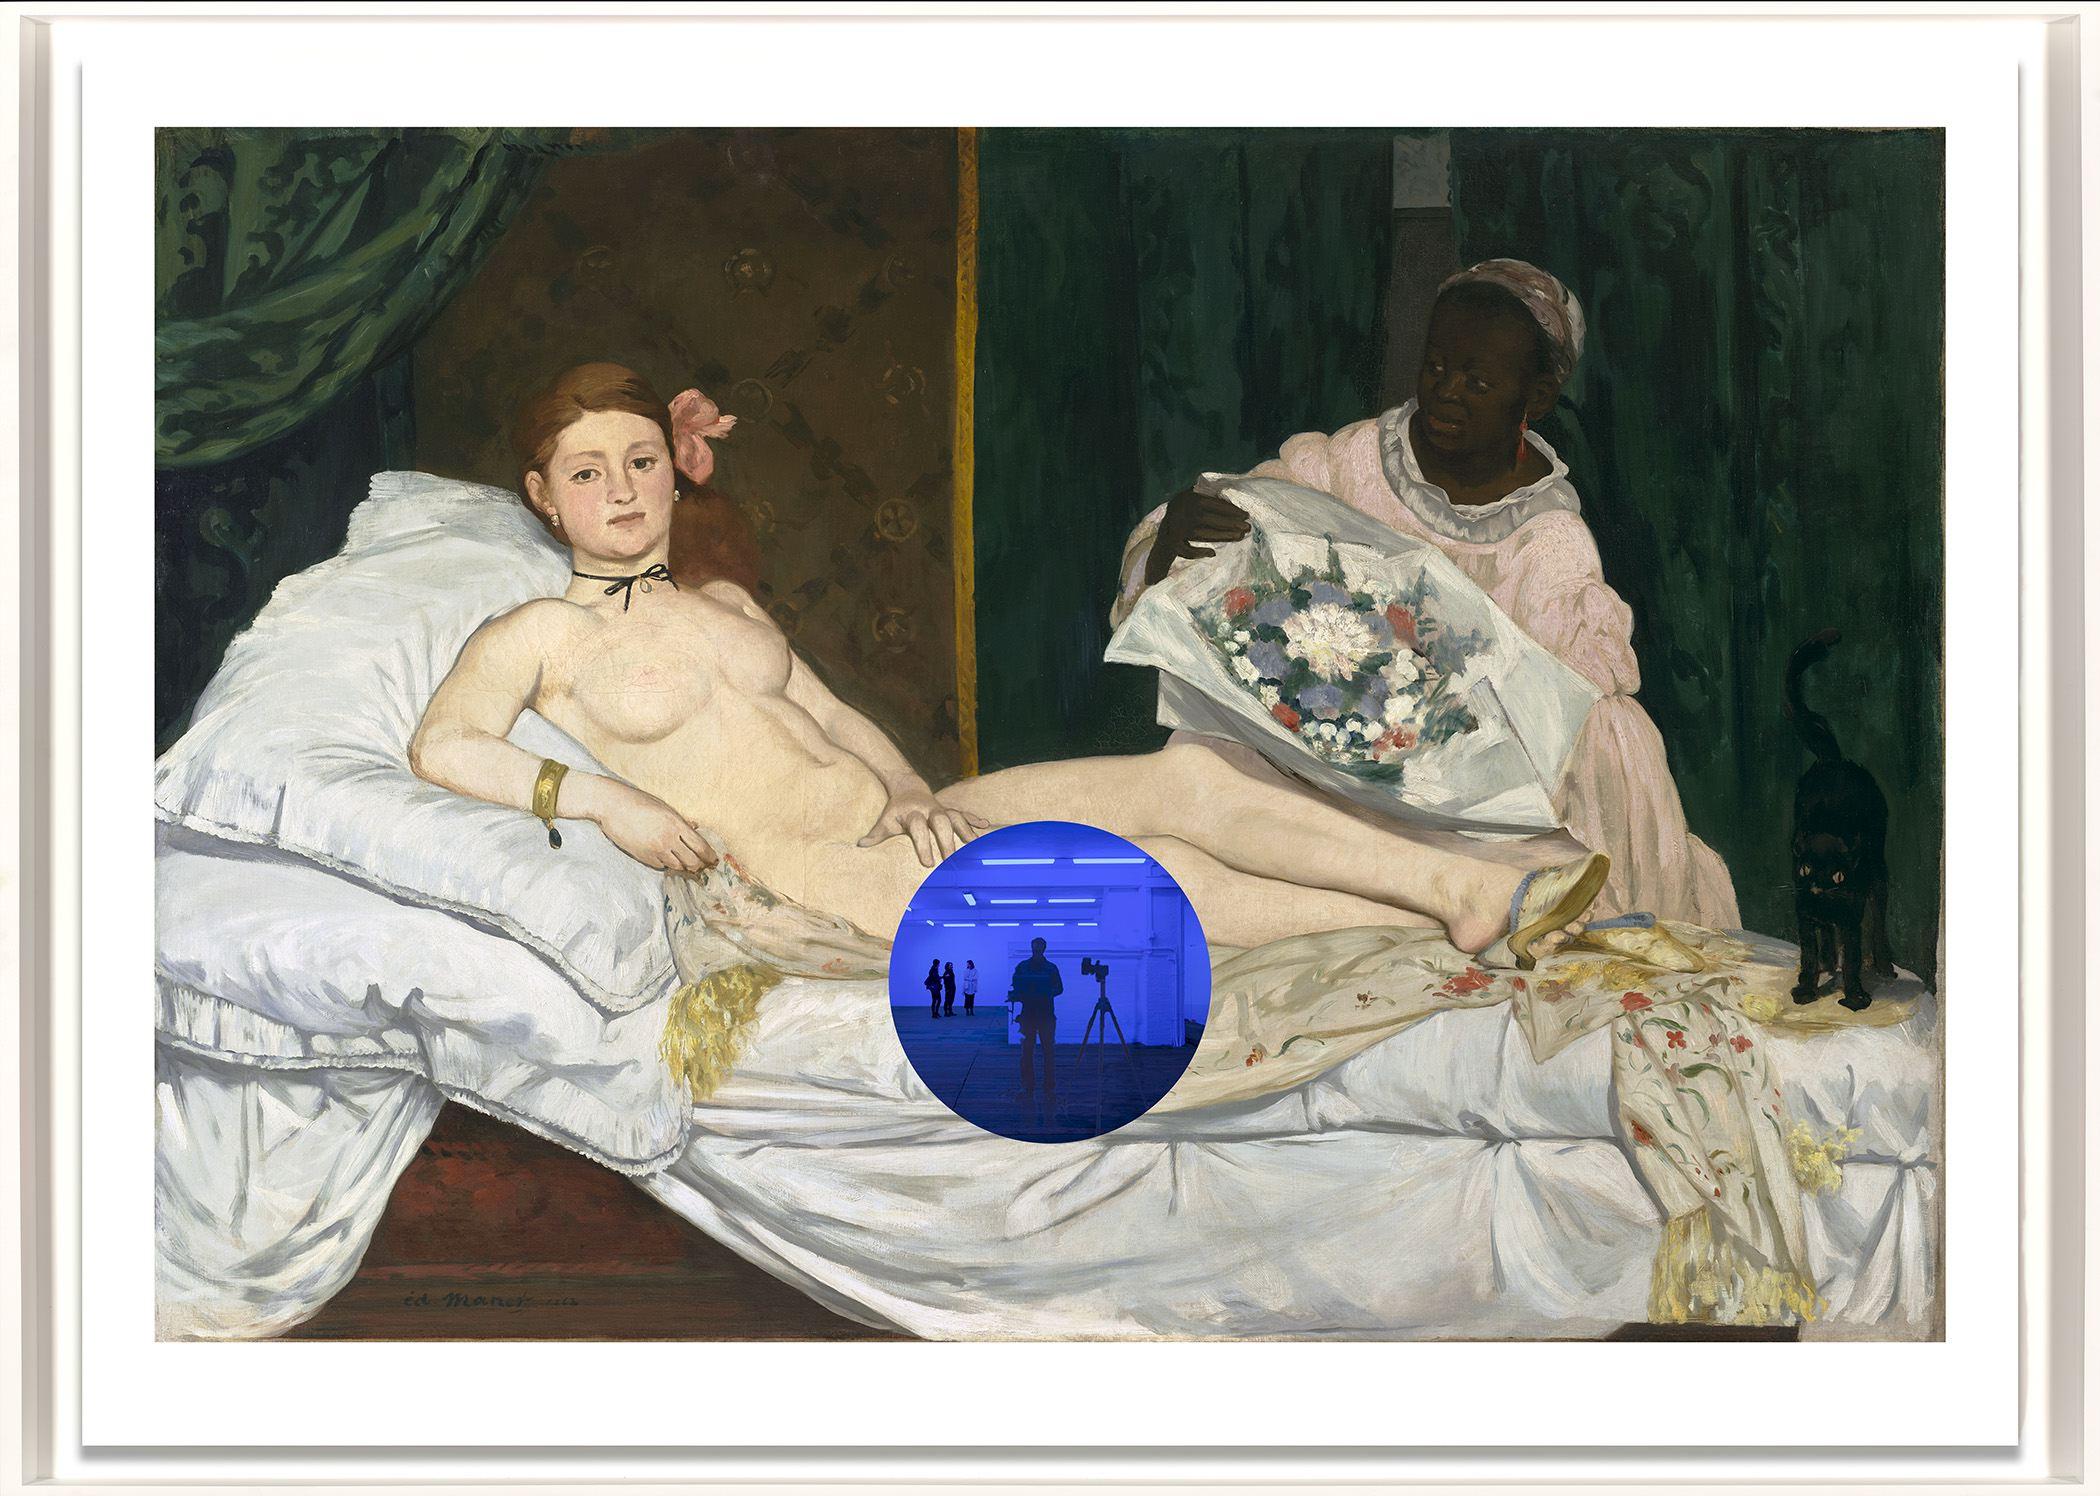 Jeff Koons
Gazing Ball (Manet Olympia), 2017
Signed and dated lower margin
Archival pigment print on Innova rag paper, glass
Image Dimensions:
33 5/8 x 46 13/16inches 85.4 x 118.9cm
Frame dimensions:
34 7/8 x 48 1/16inches 88.39 x 122.42cn
Edition